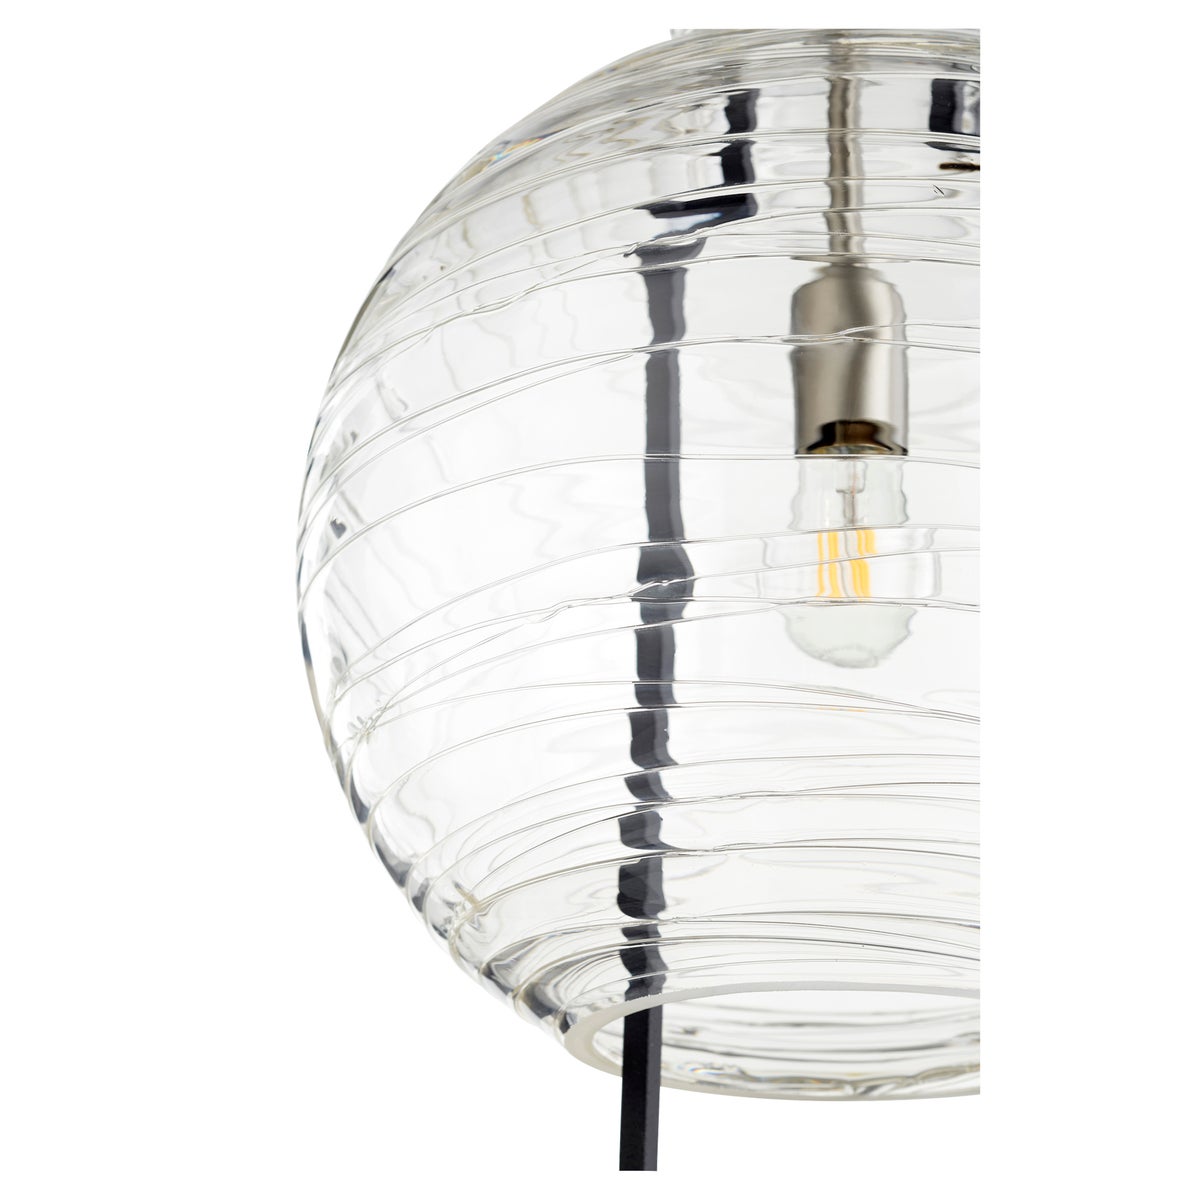 Globe pendant light with blown clear textured glass shade and noir/satin nickel finishes. Adds contemporary-chic style to any setting. Dual chain and stem hanging system for adjustable height. Enhance your kitchen, bedroom, or bathroom with warm glow.